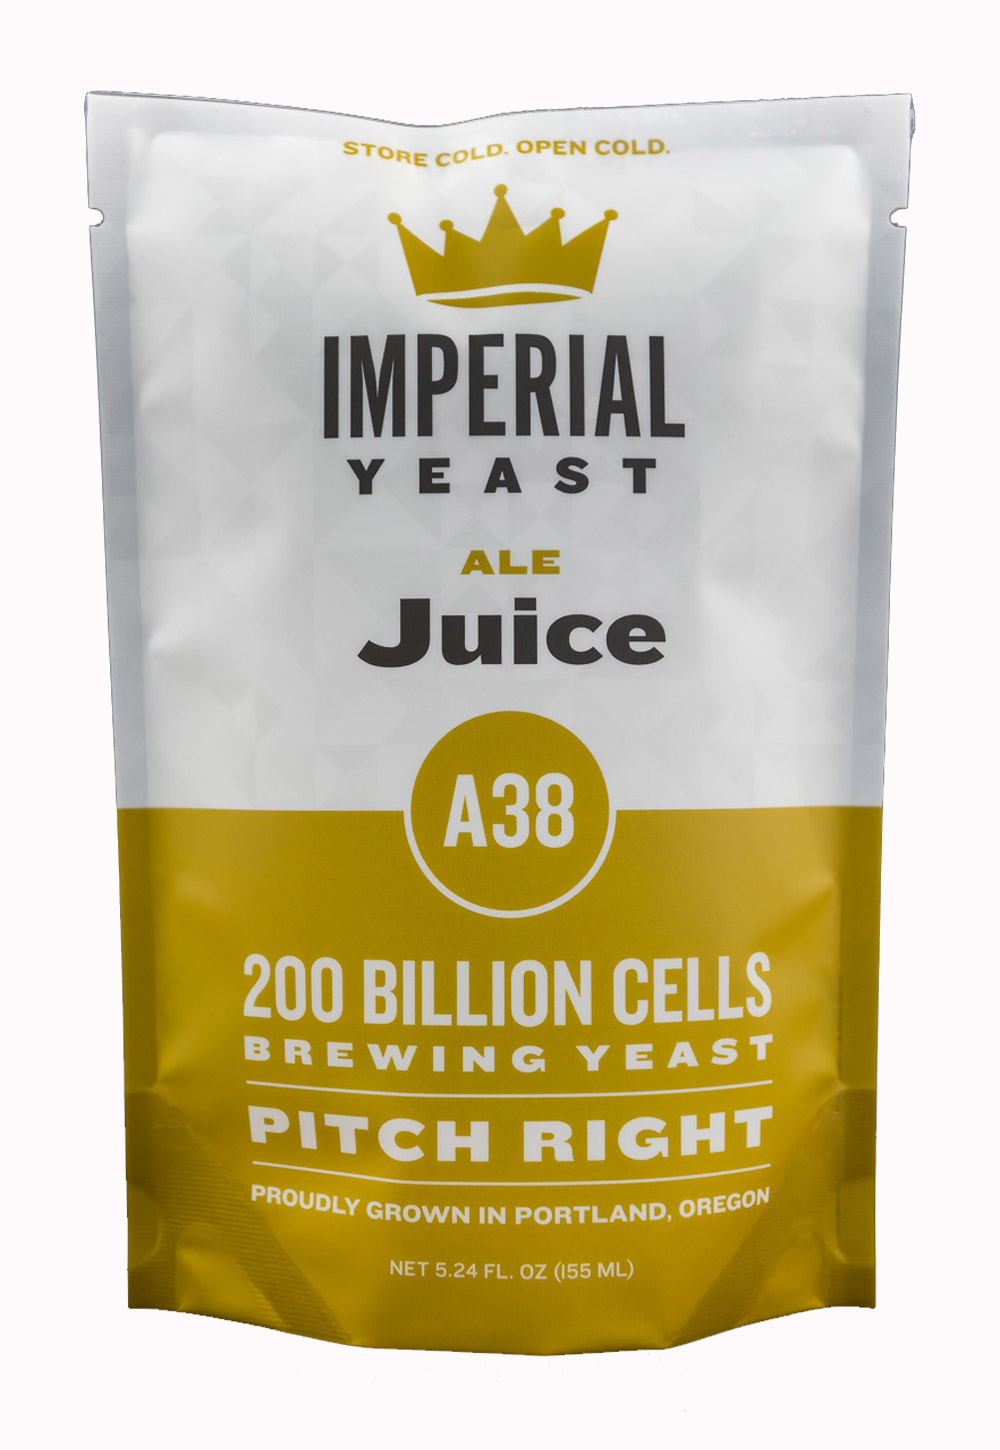 Imperial Yeast A38 Juice